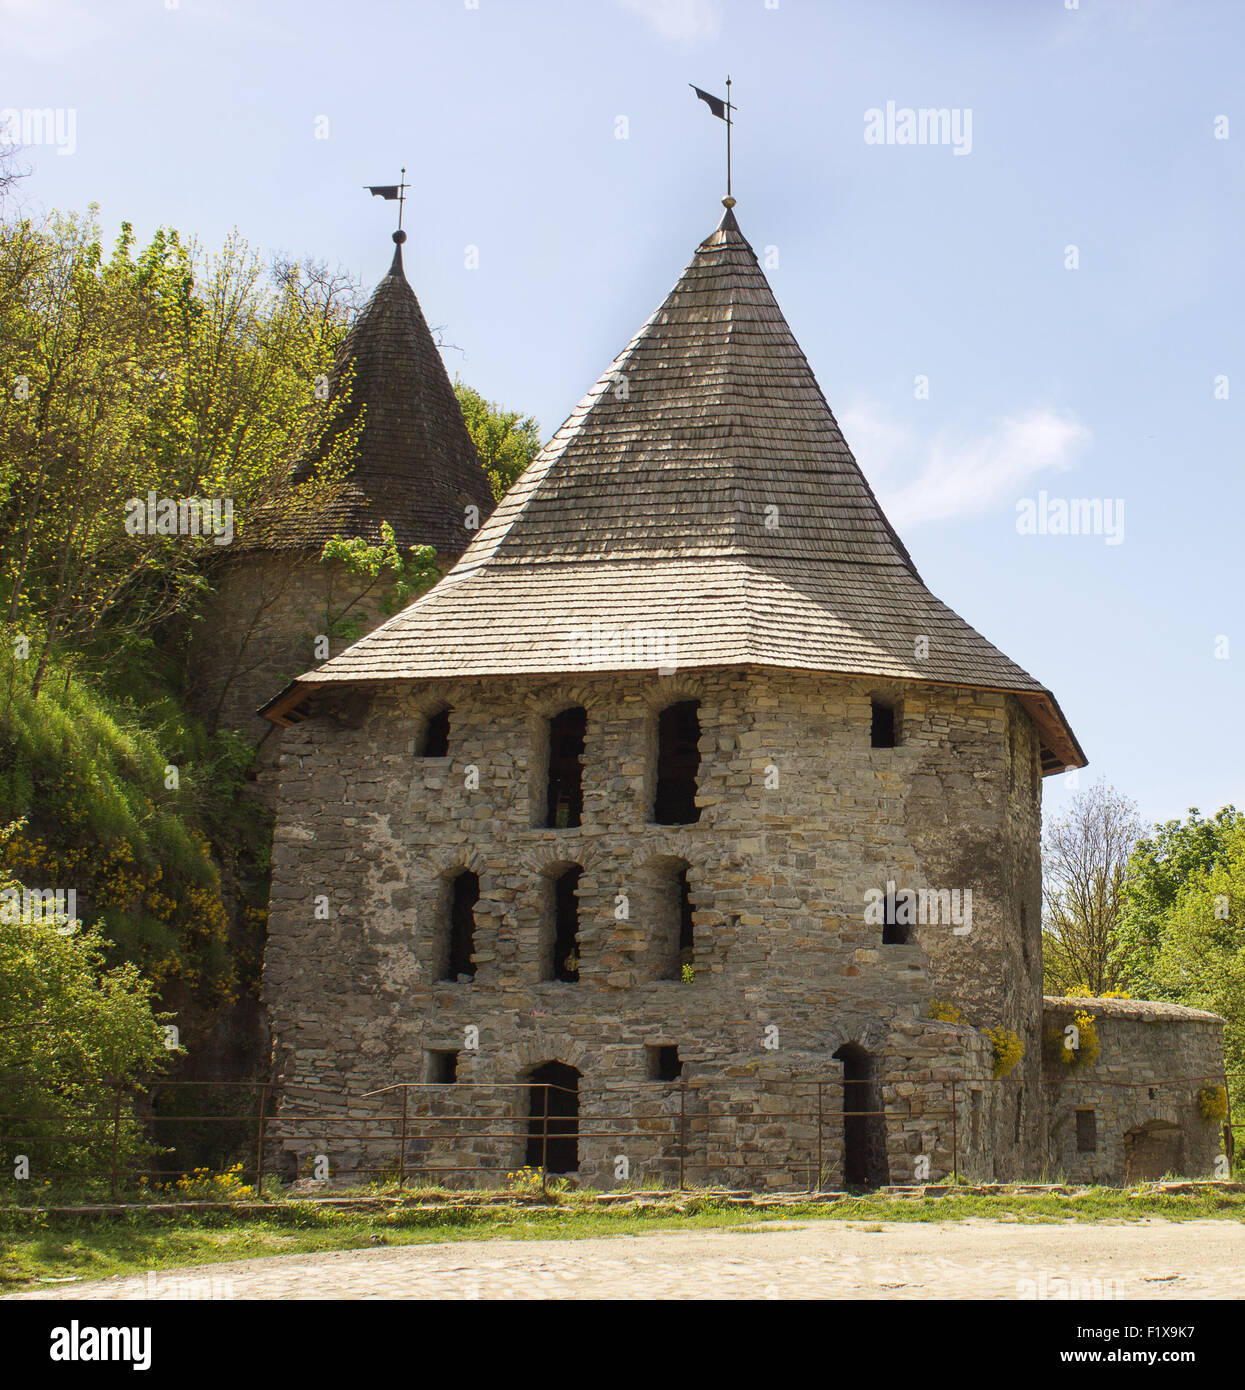 Old Tower of medieval castle. Stock Photo